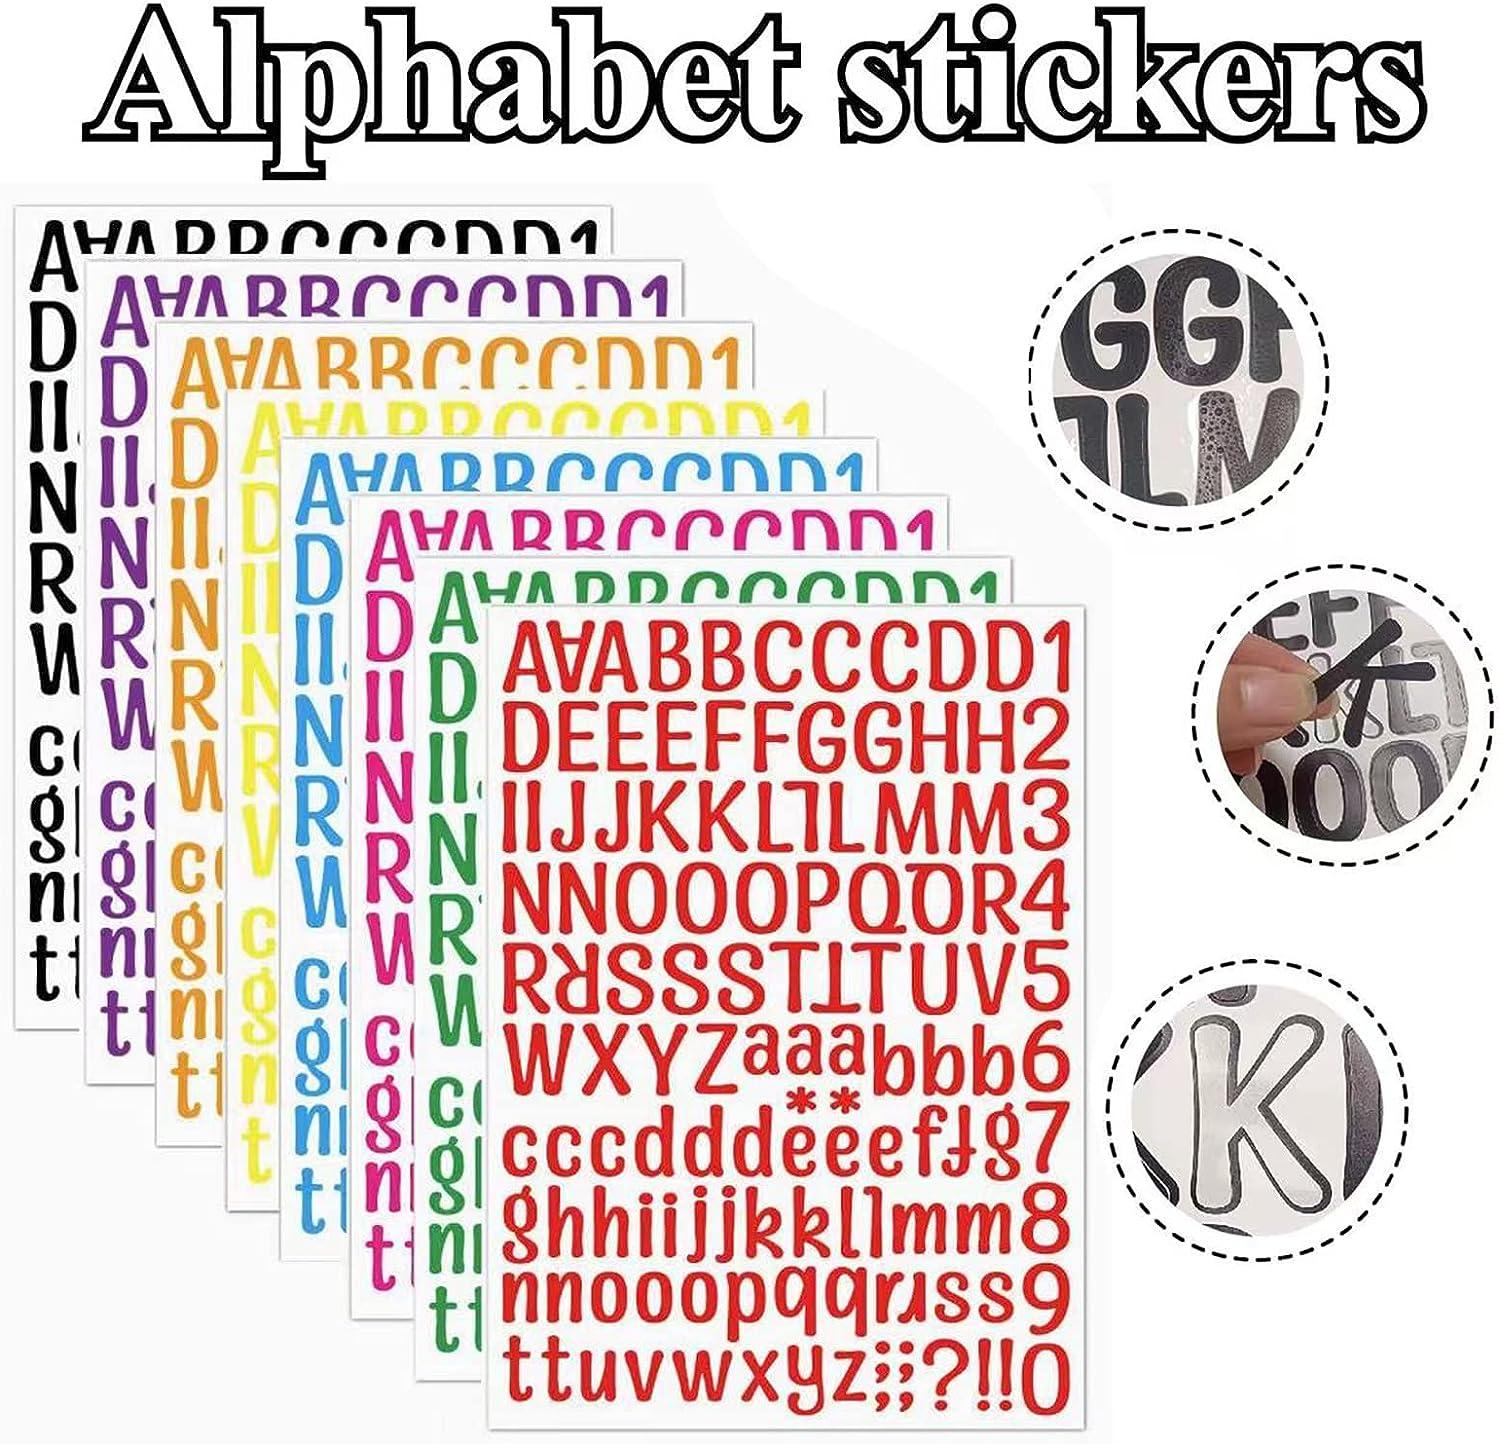 8 Sheets self-adhesive mailbox decal letter stickers large abc stickers